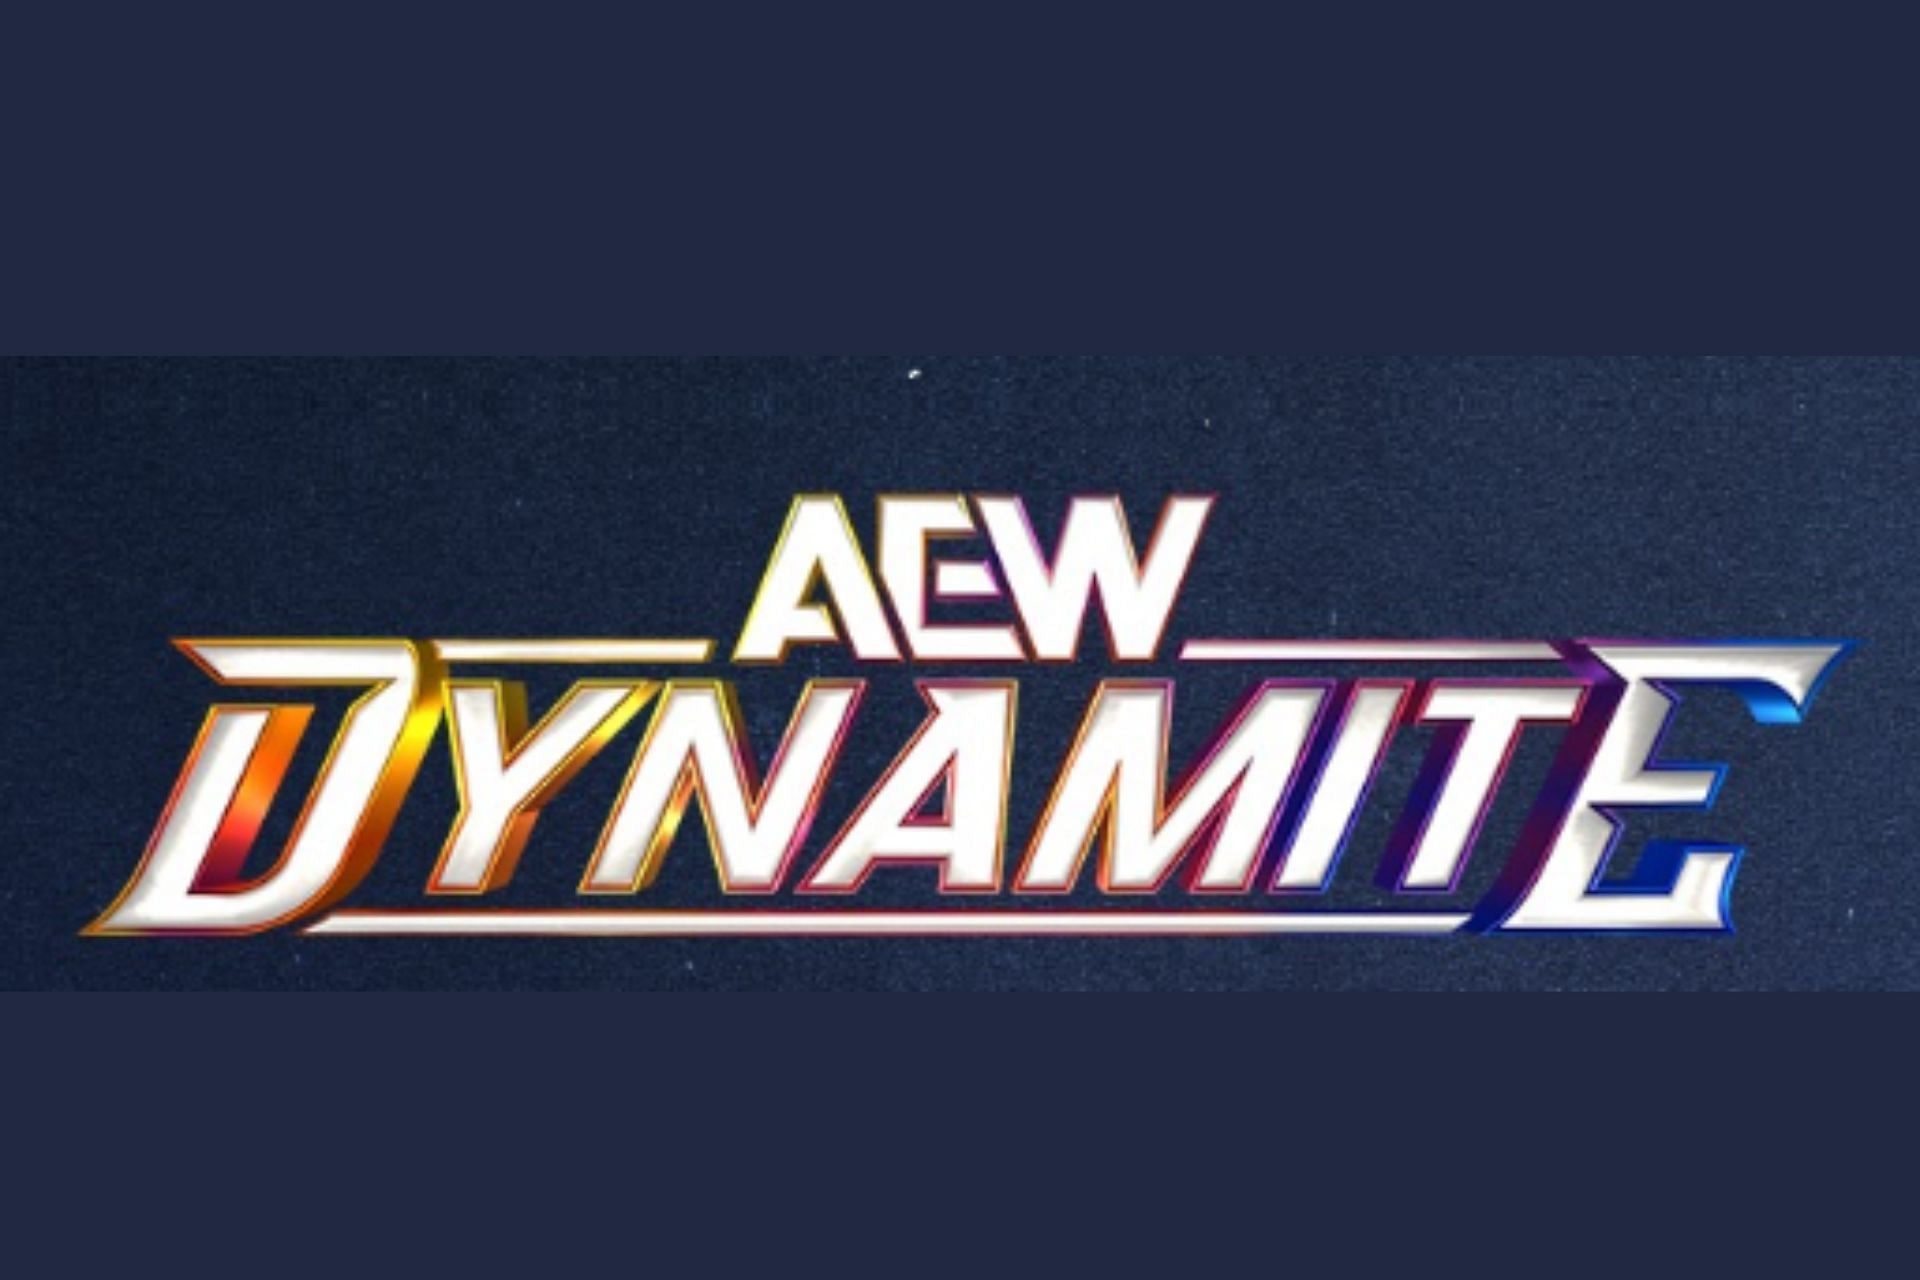 A defeat in an AEW Dynamite Match had a wrestler post on his social handle [Image Credits: AEW Youtube]